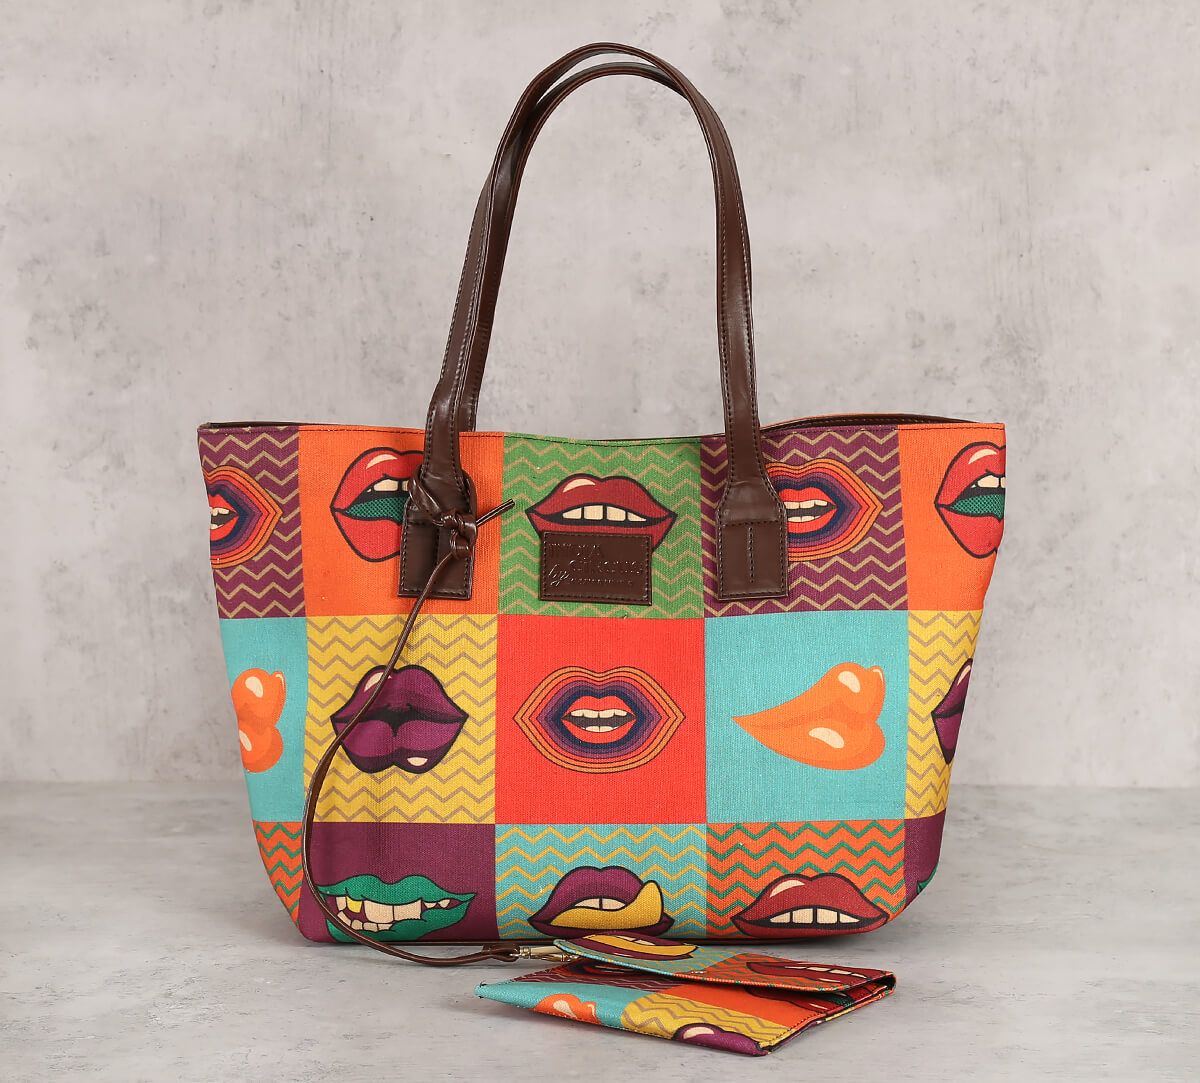 Discover 78+ leather tote bags india - in.duhocakina